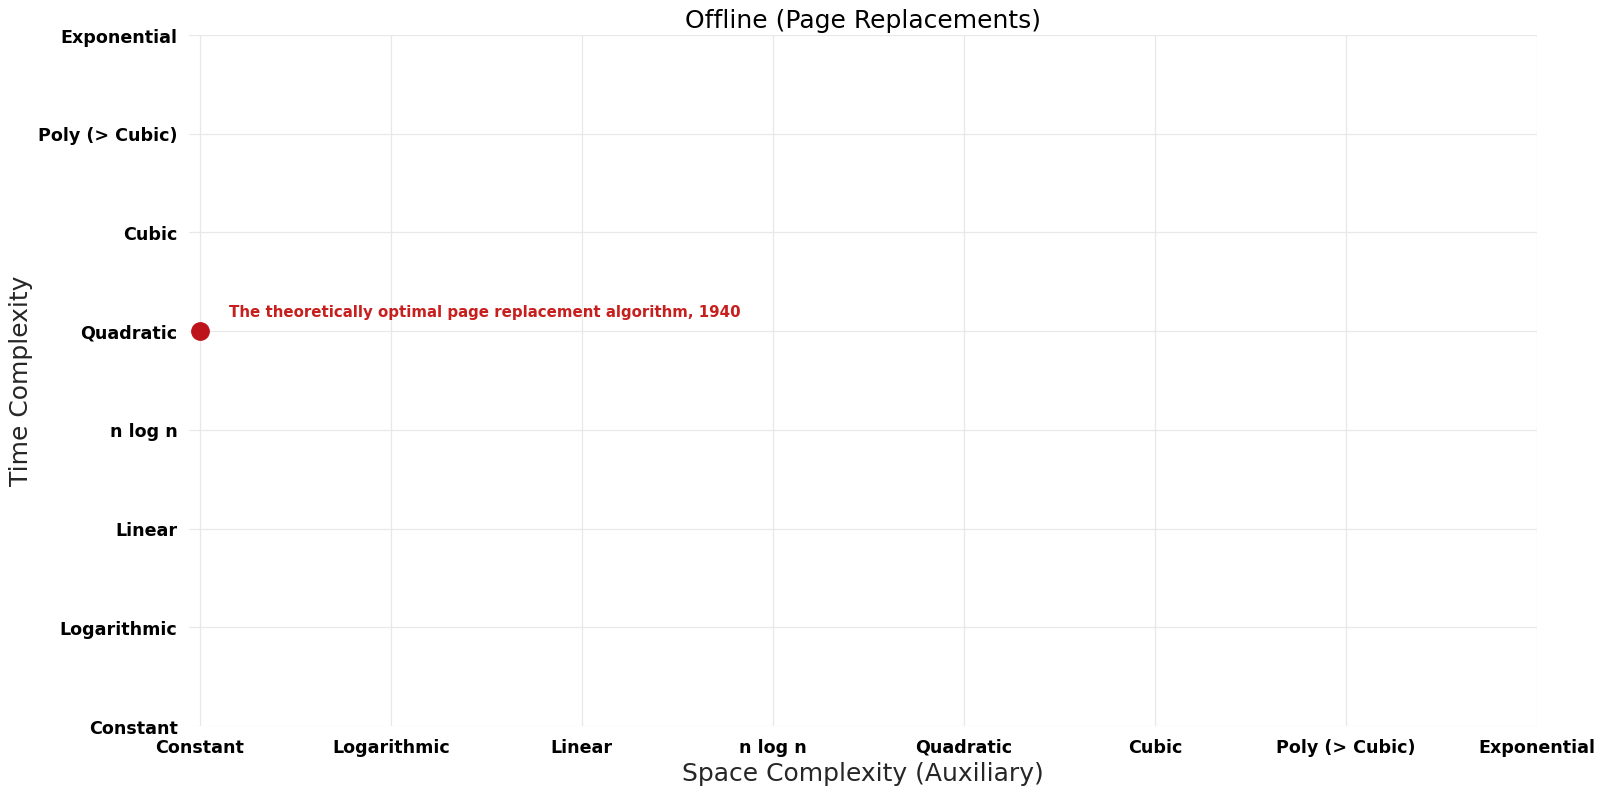 File:Page Replacements - Offline - Pareto Frontier.png